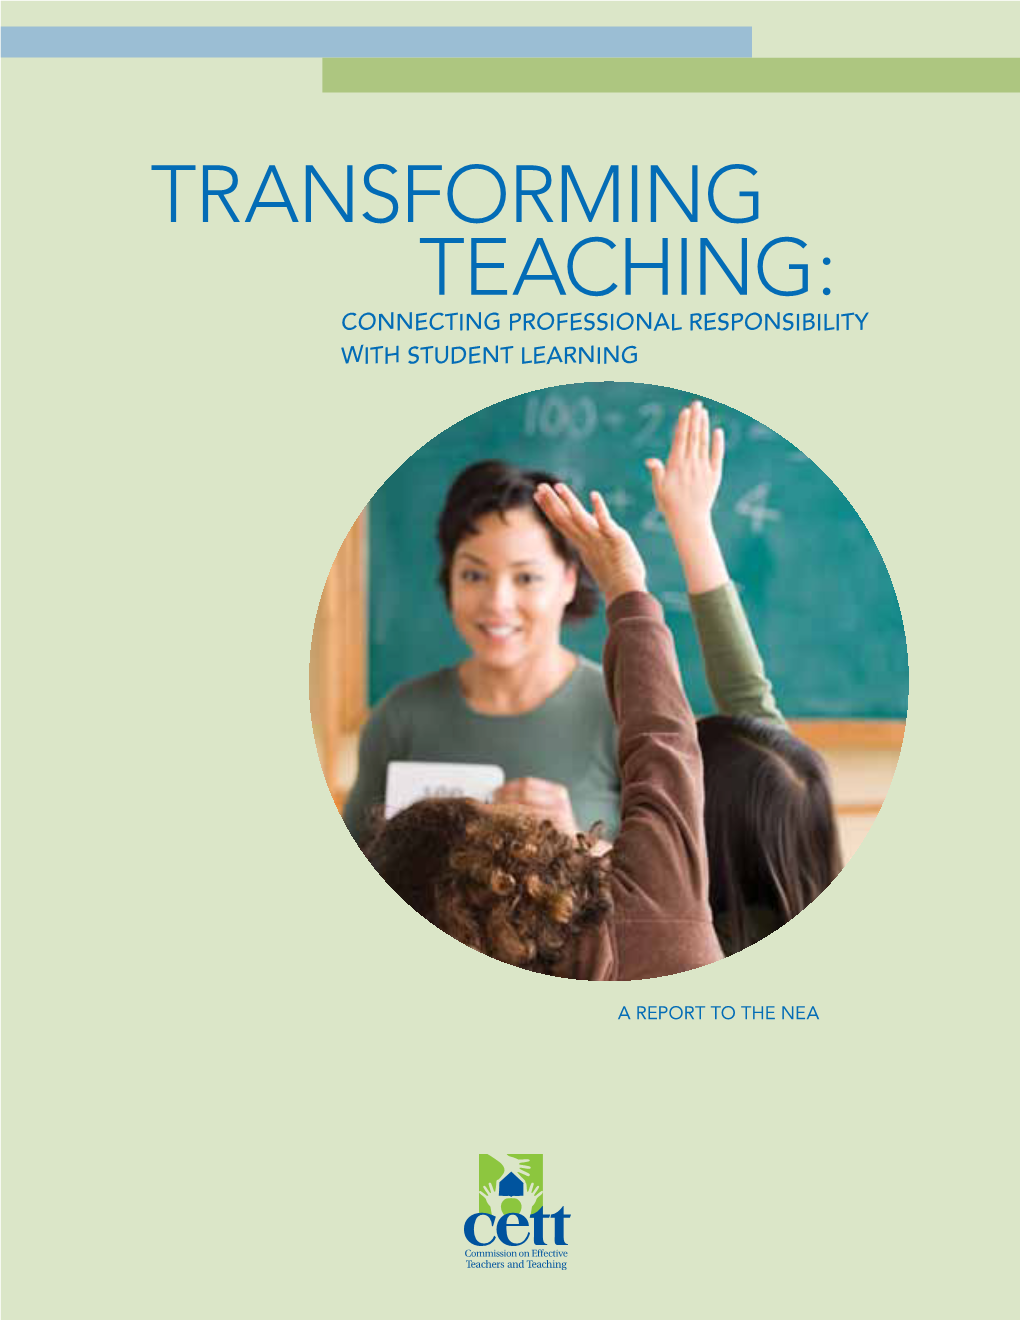 Transforming Teaching: Connecting Professional Responsibility with Student Learning